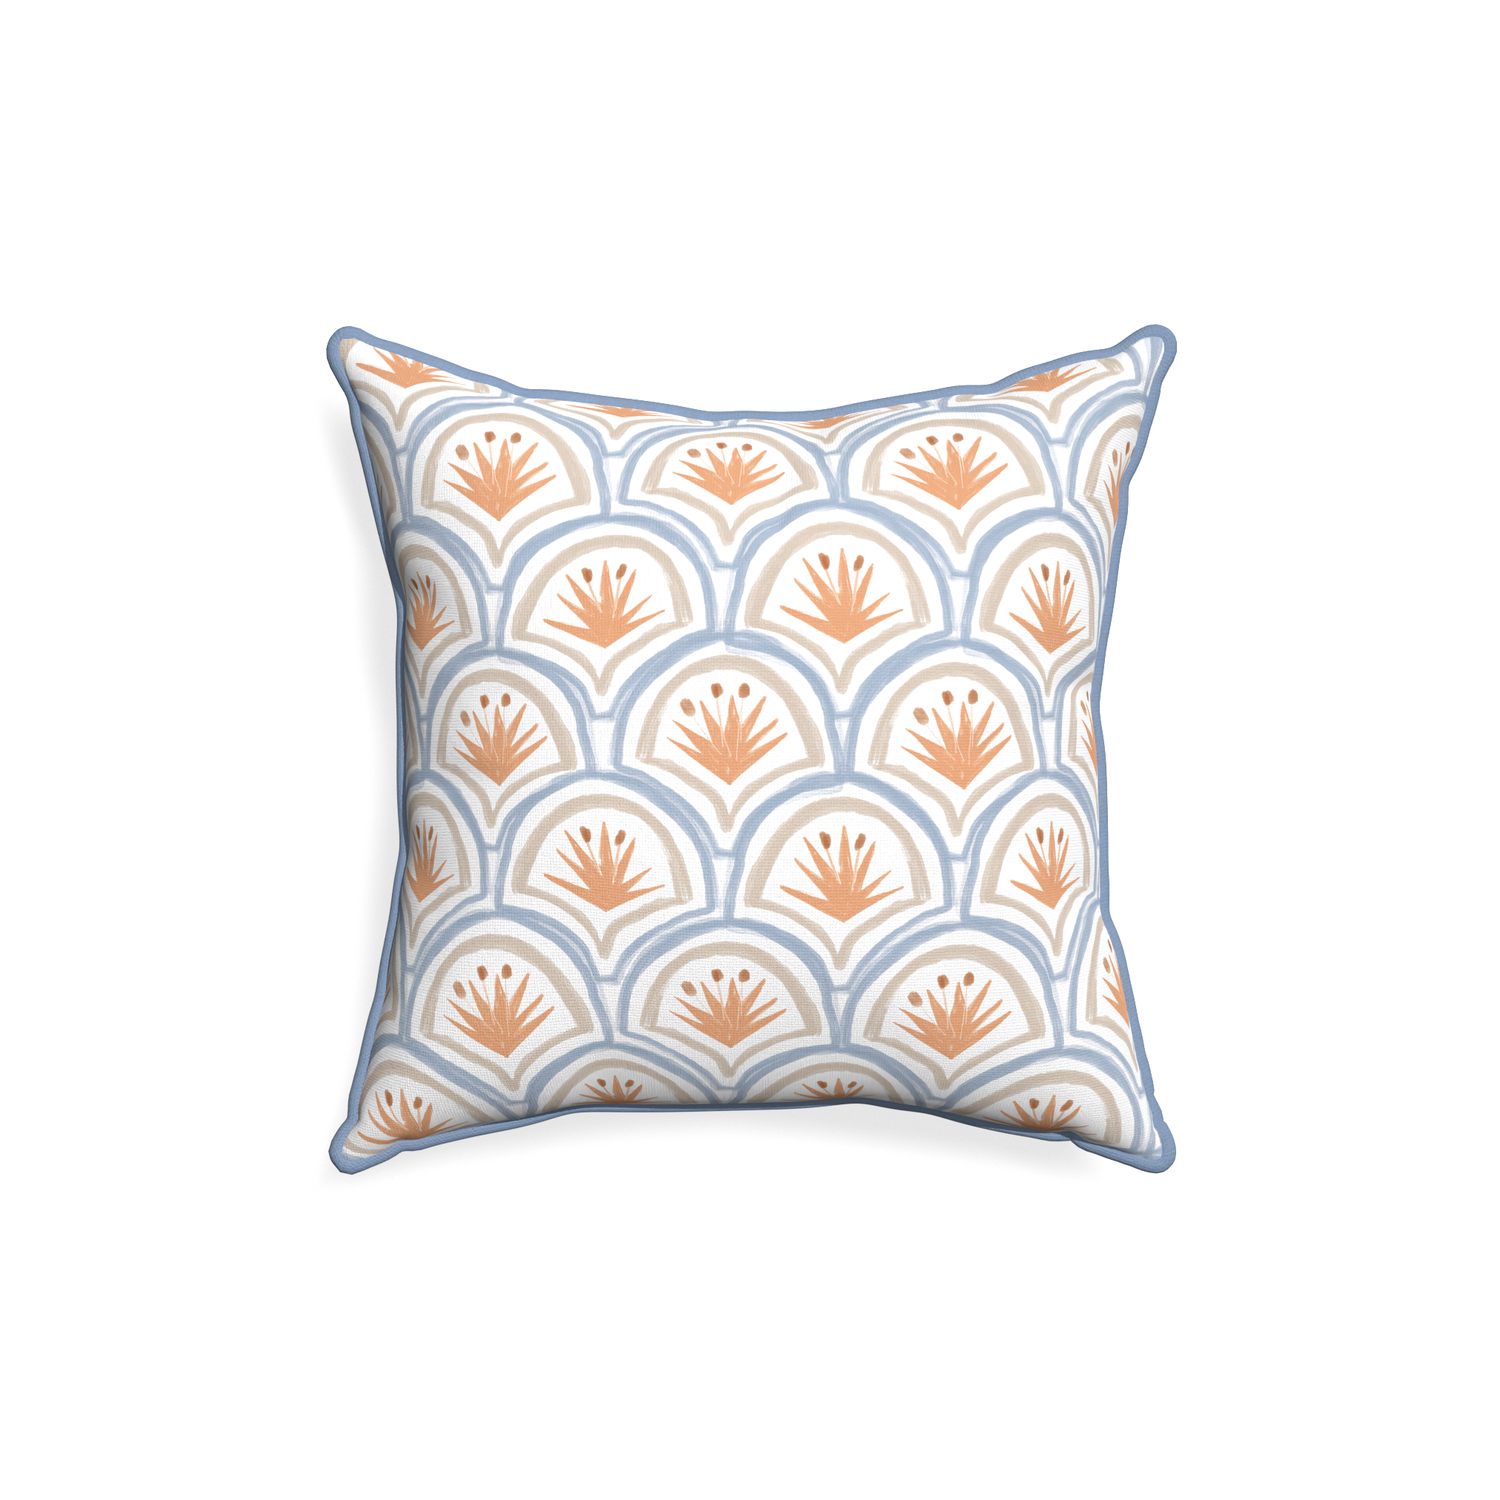 18-square thatcher apricot custom art deco palm patternpillow with sky piping on white background